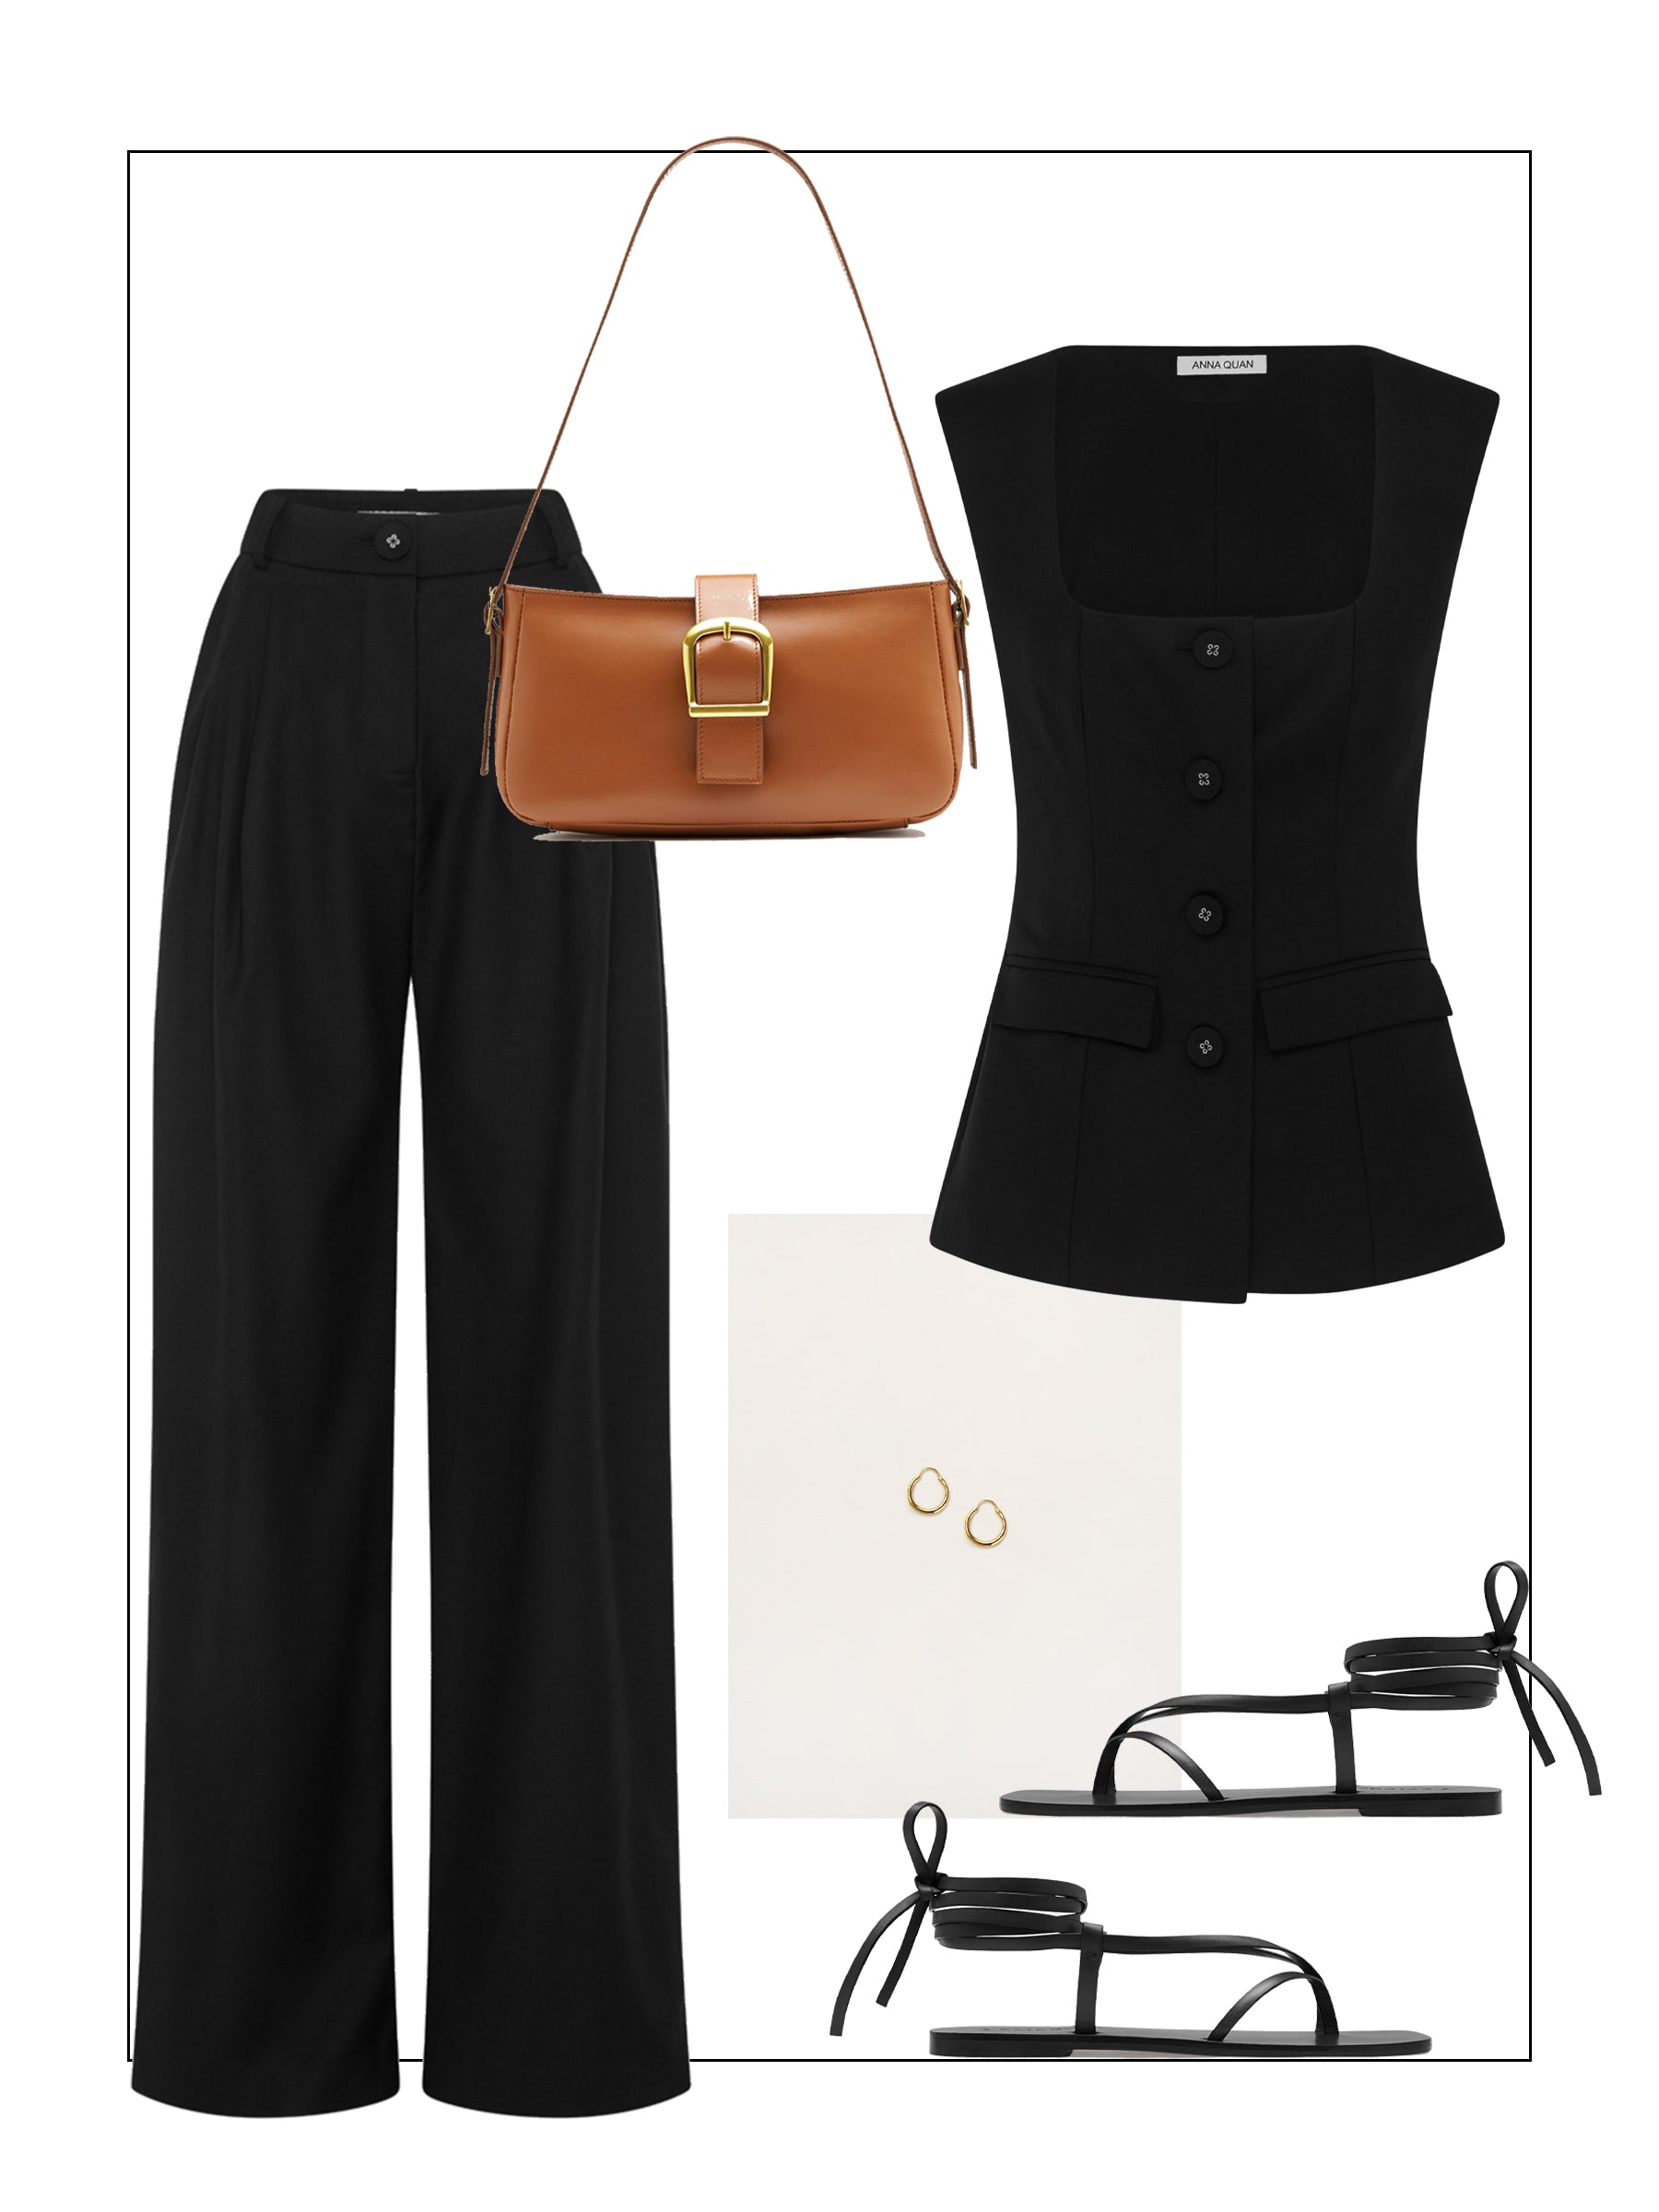 Black waistcoat and black tailored trousers